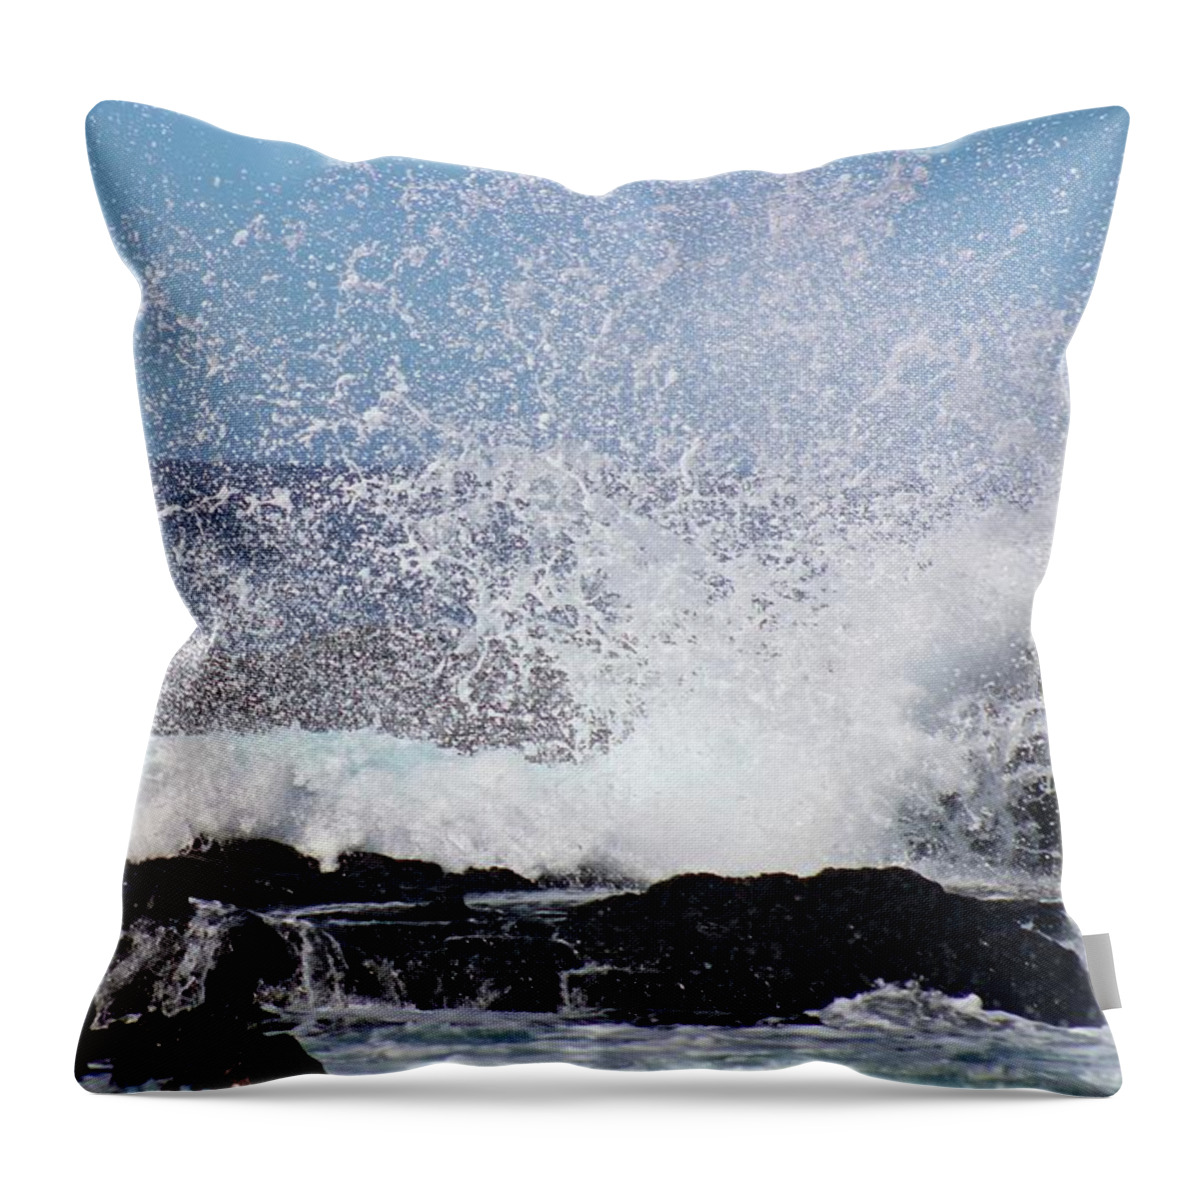 Ocean Throw Pillow featuring the photograph Breaking Waves by Jill Myers